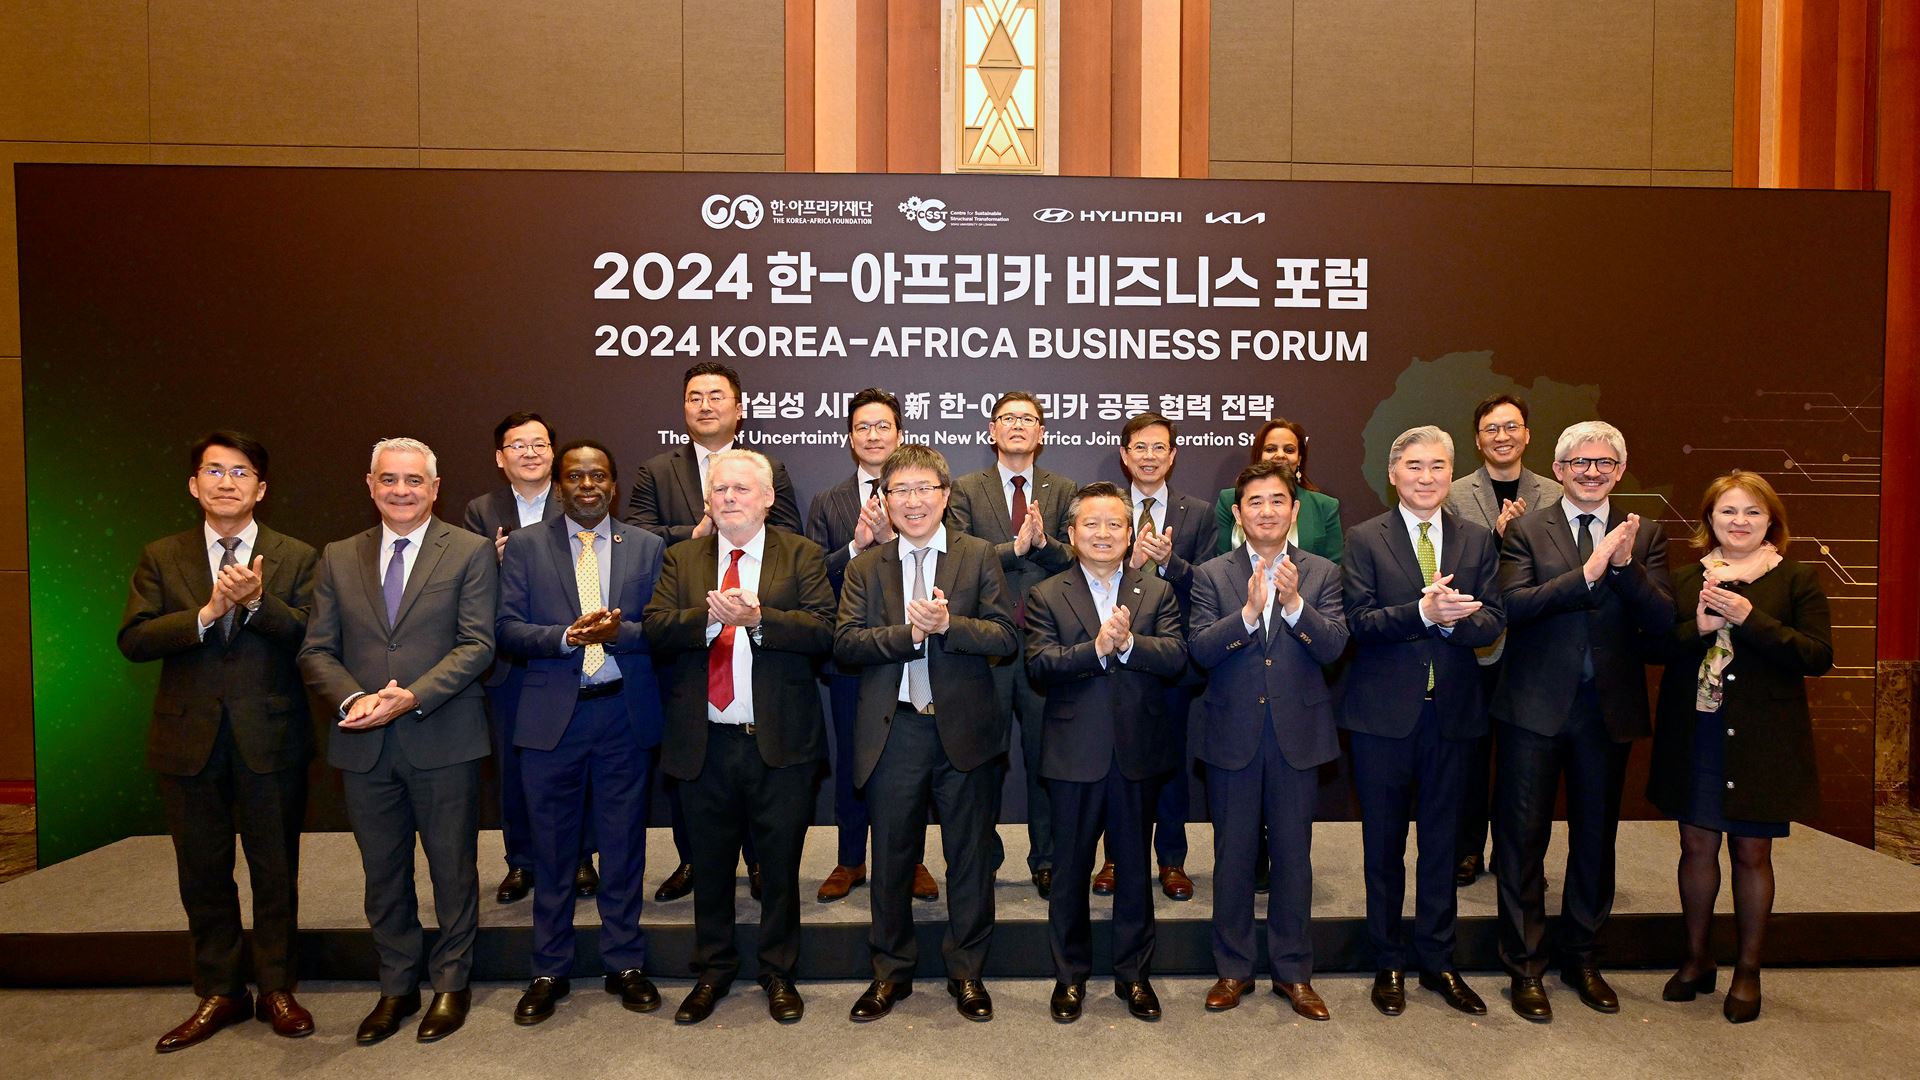 Front Row, Left to Right: Dong-Wook Kim (Executive Vice President, HMG); Said Mouline Head of Morocco’s Agency